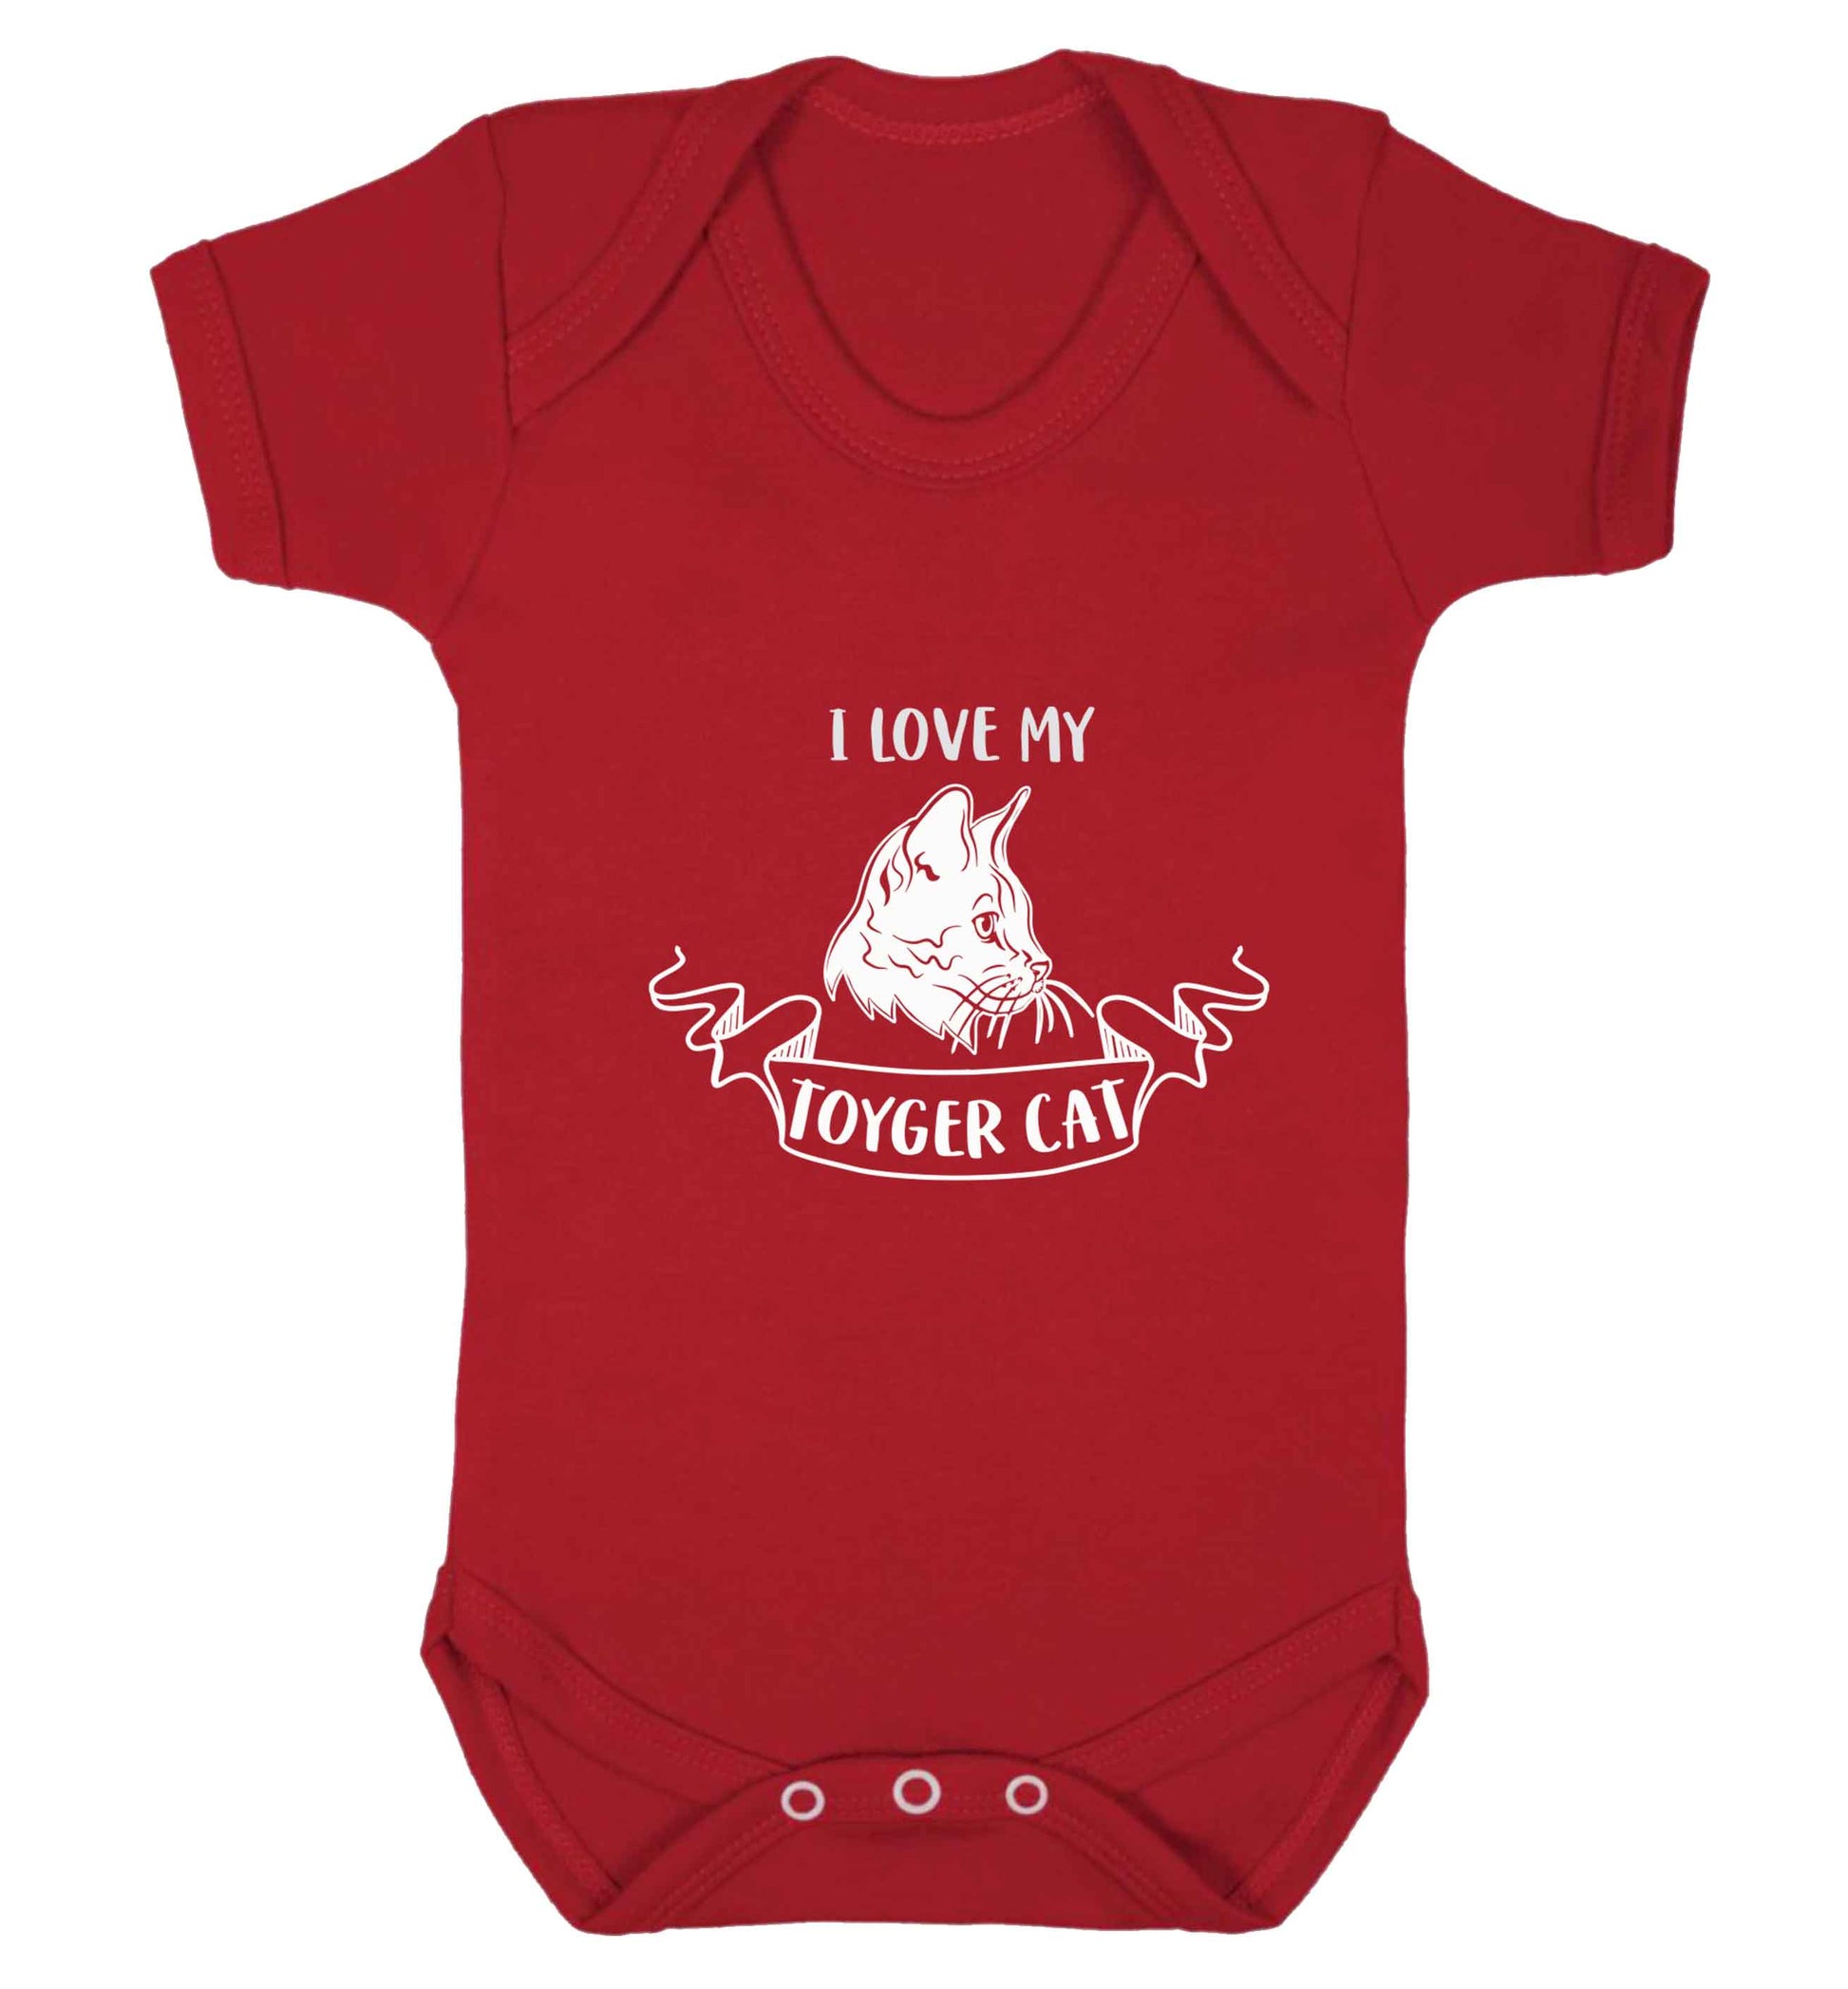 I love my toyger cat baby vest red 18-24 months